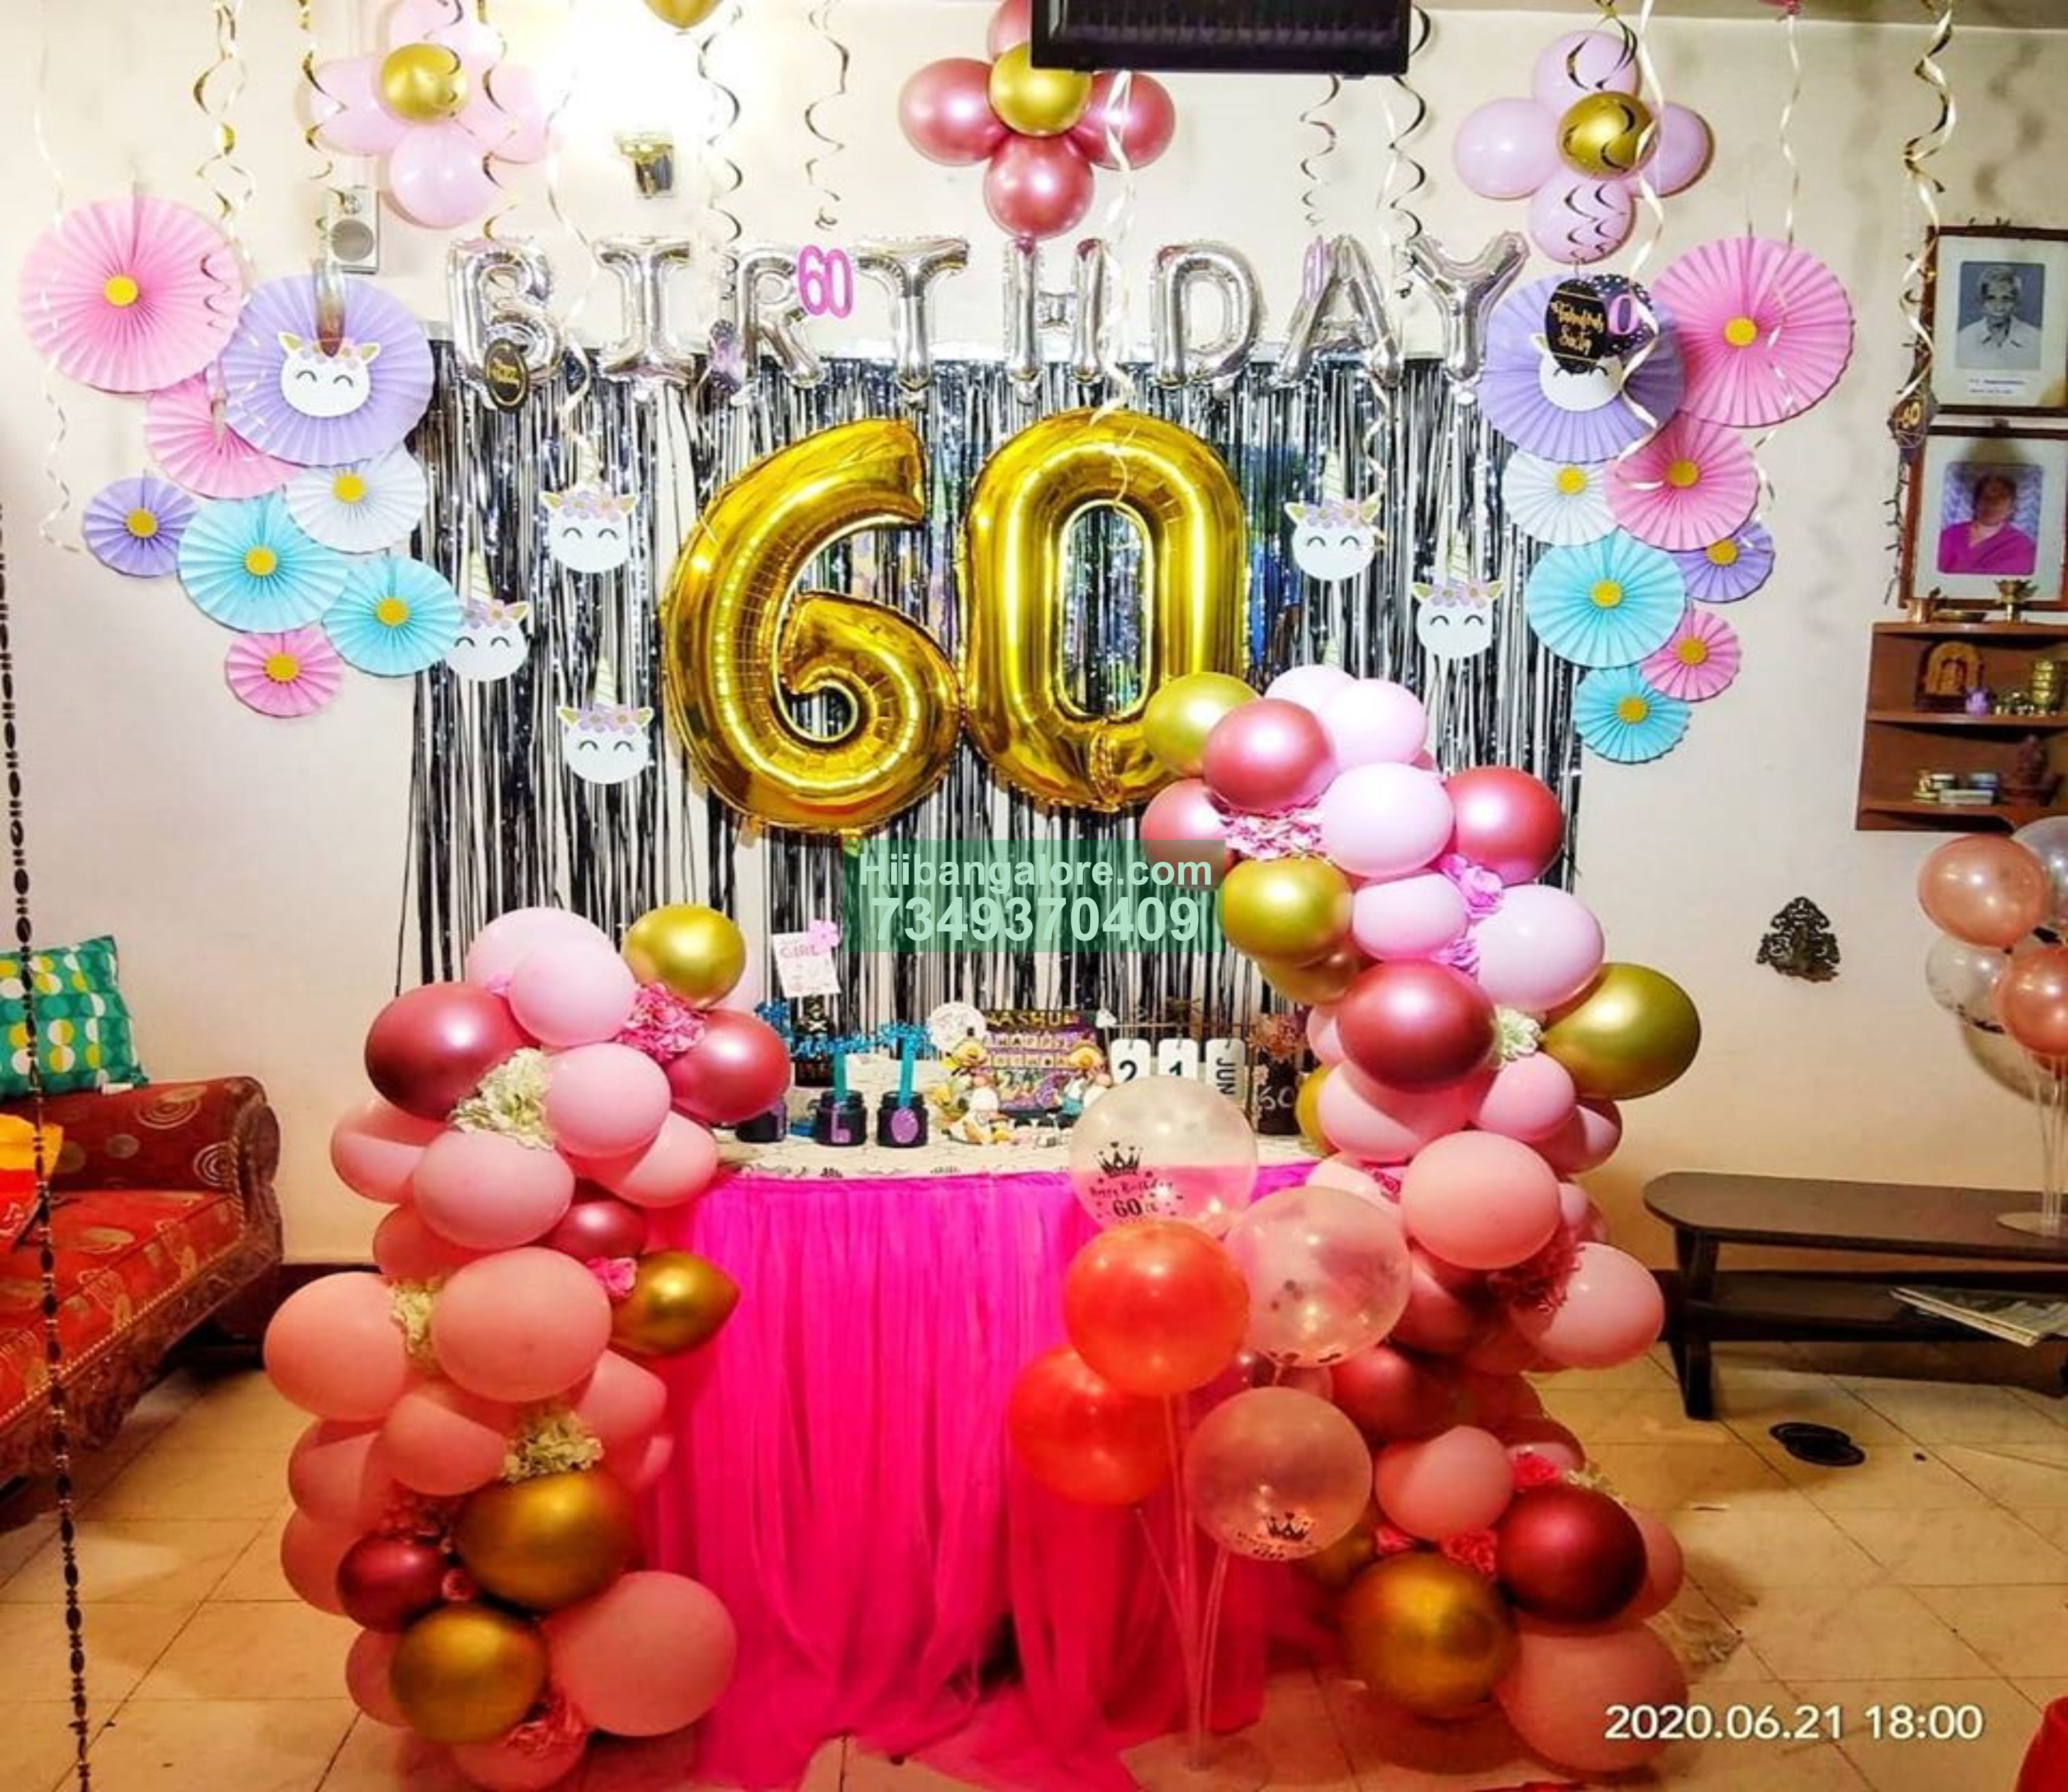 60th birthday party balloon decoration at home - Catering services ...